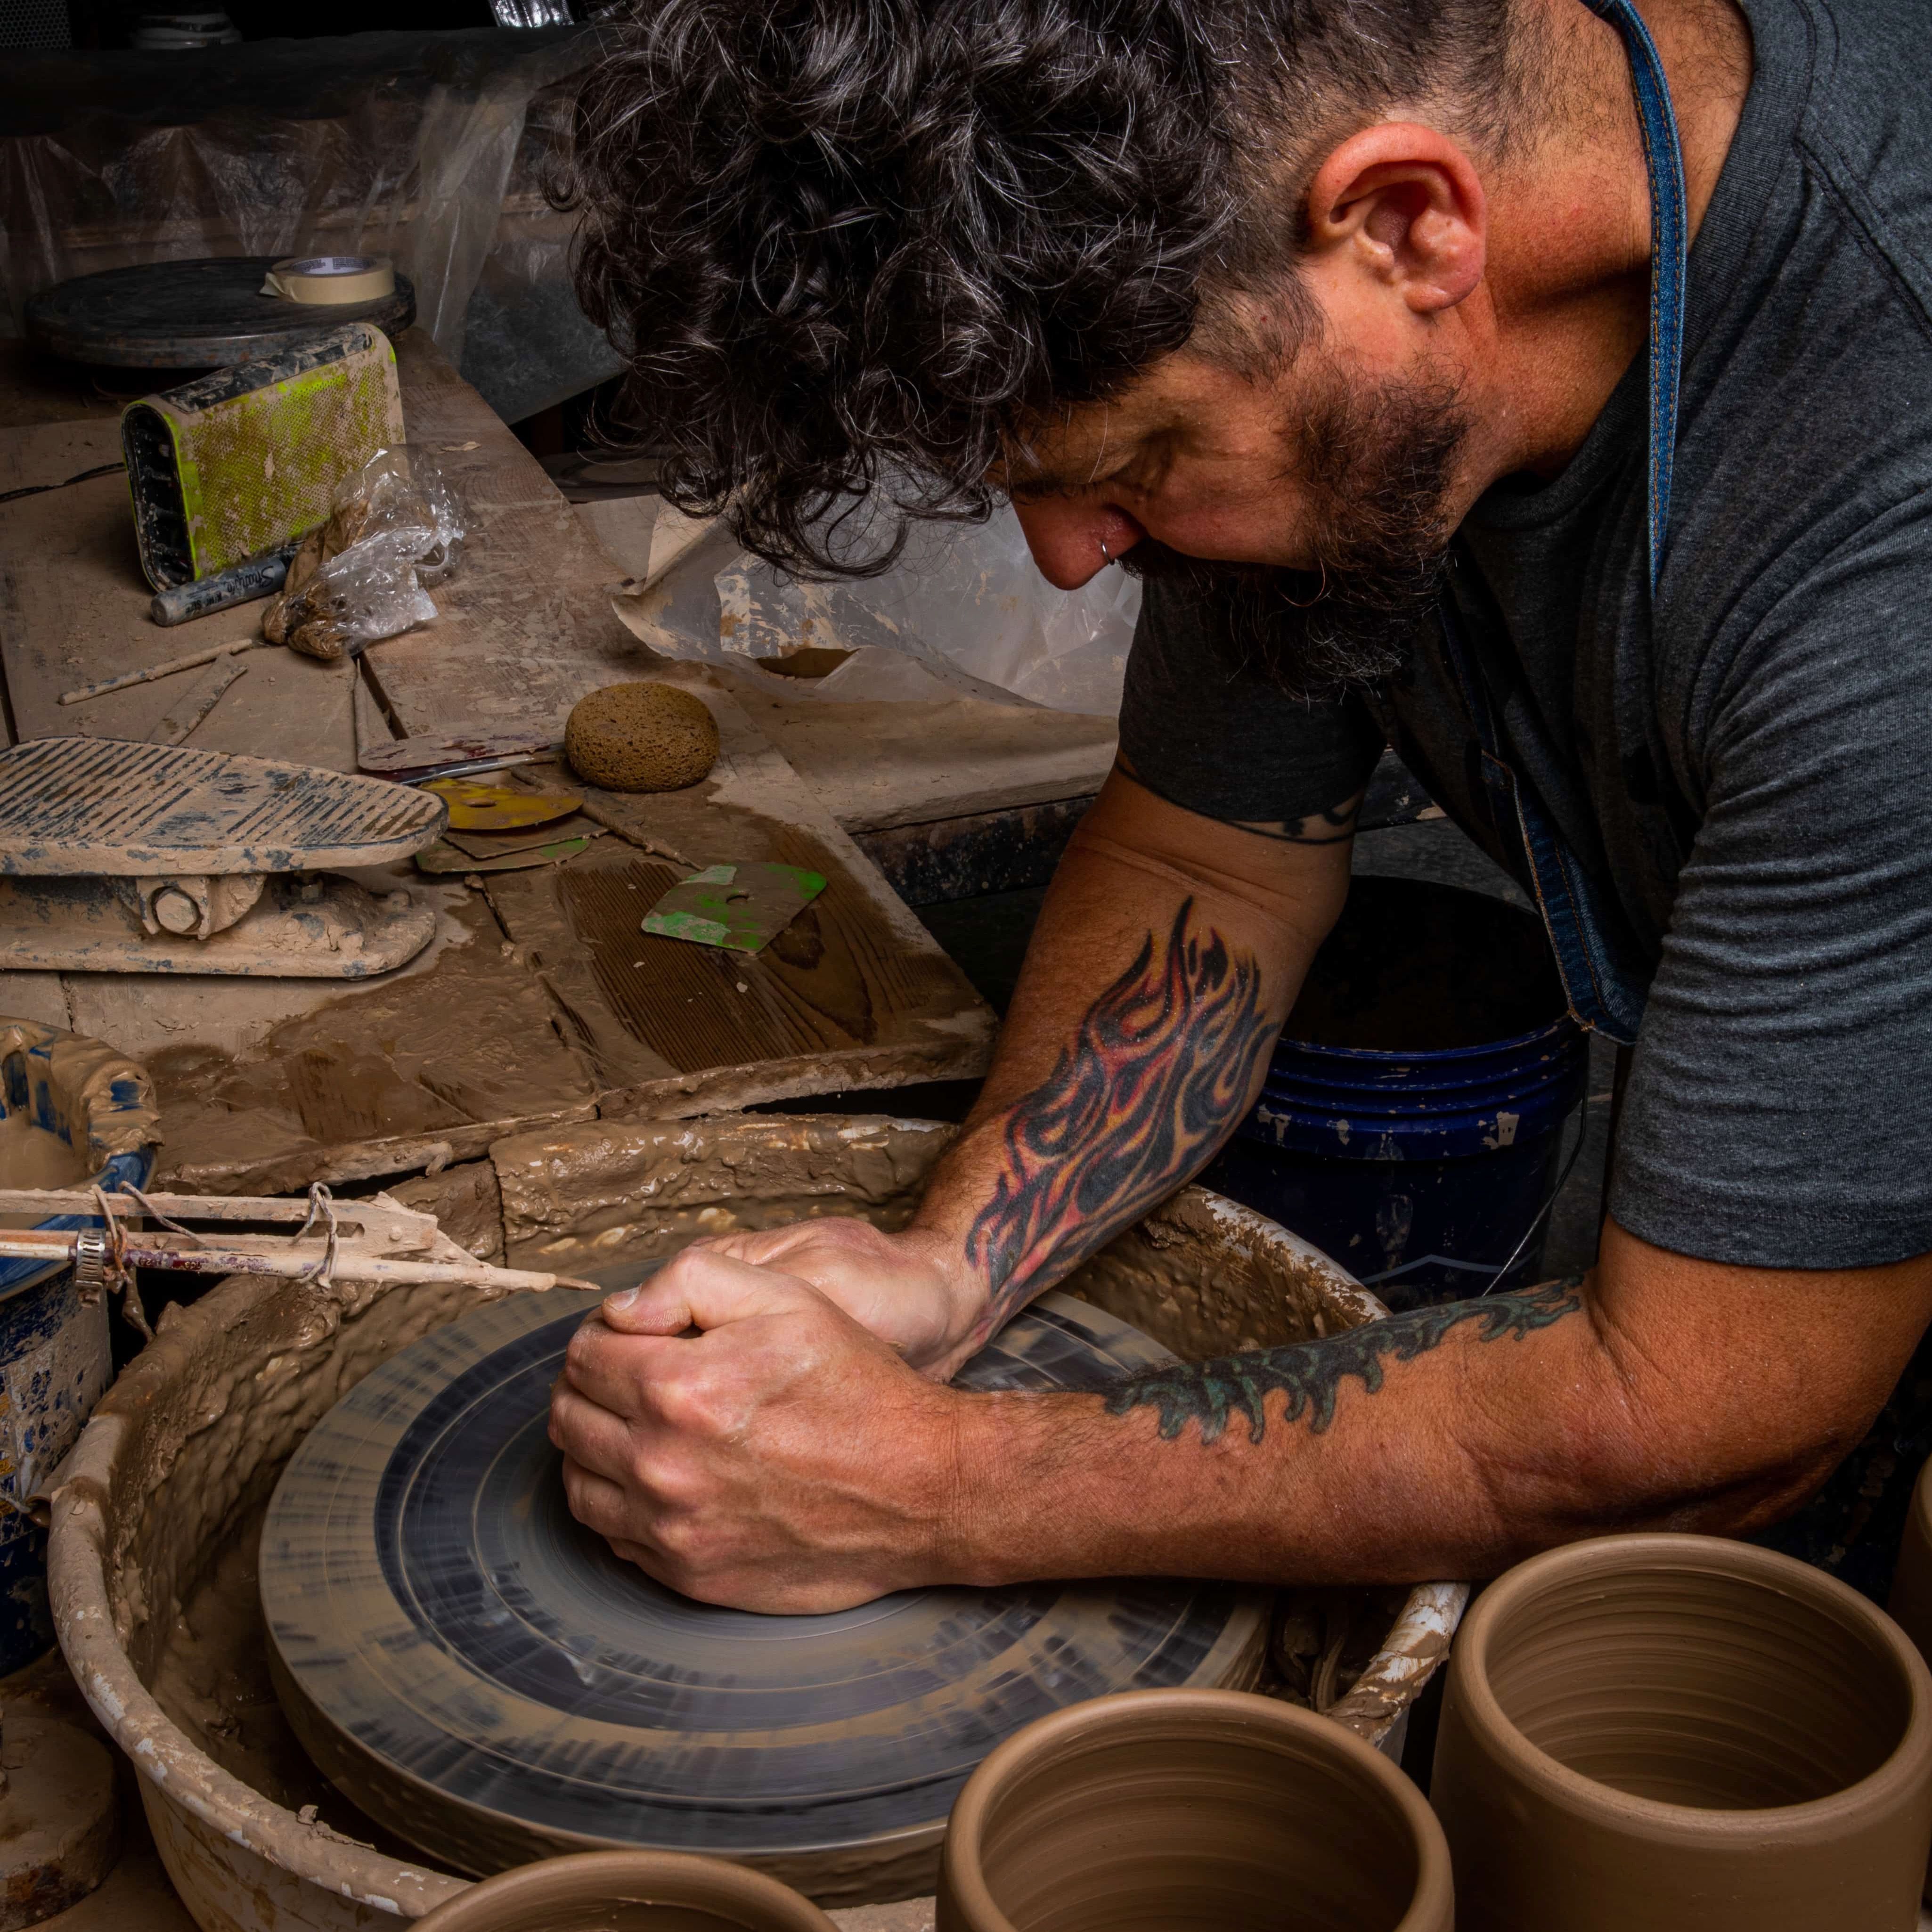 A side profile of a man throwing a ceramic mug on a potter's wheel in a clay workshop environment.